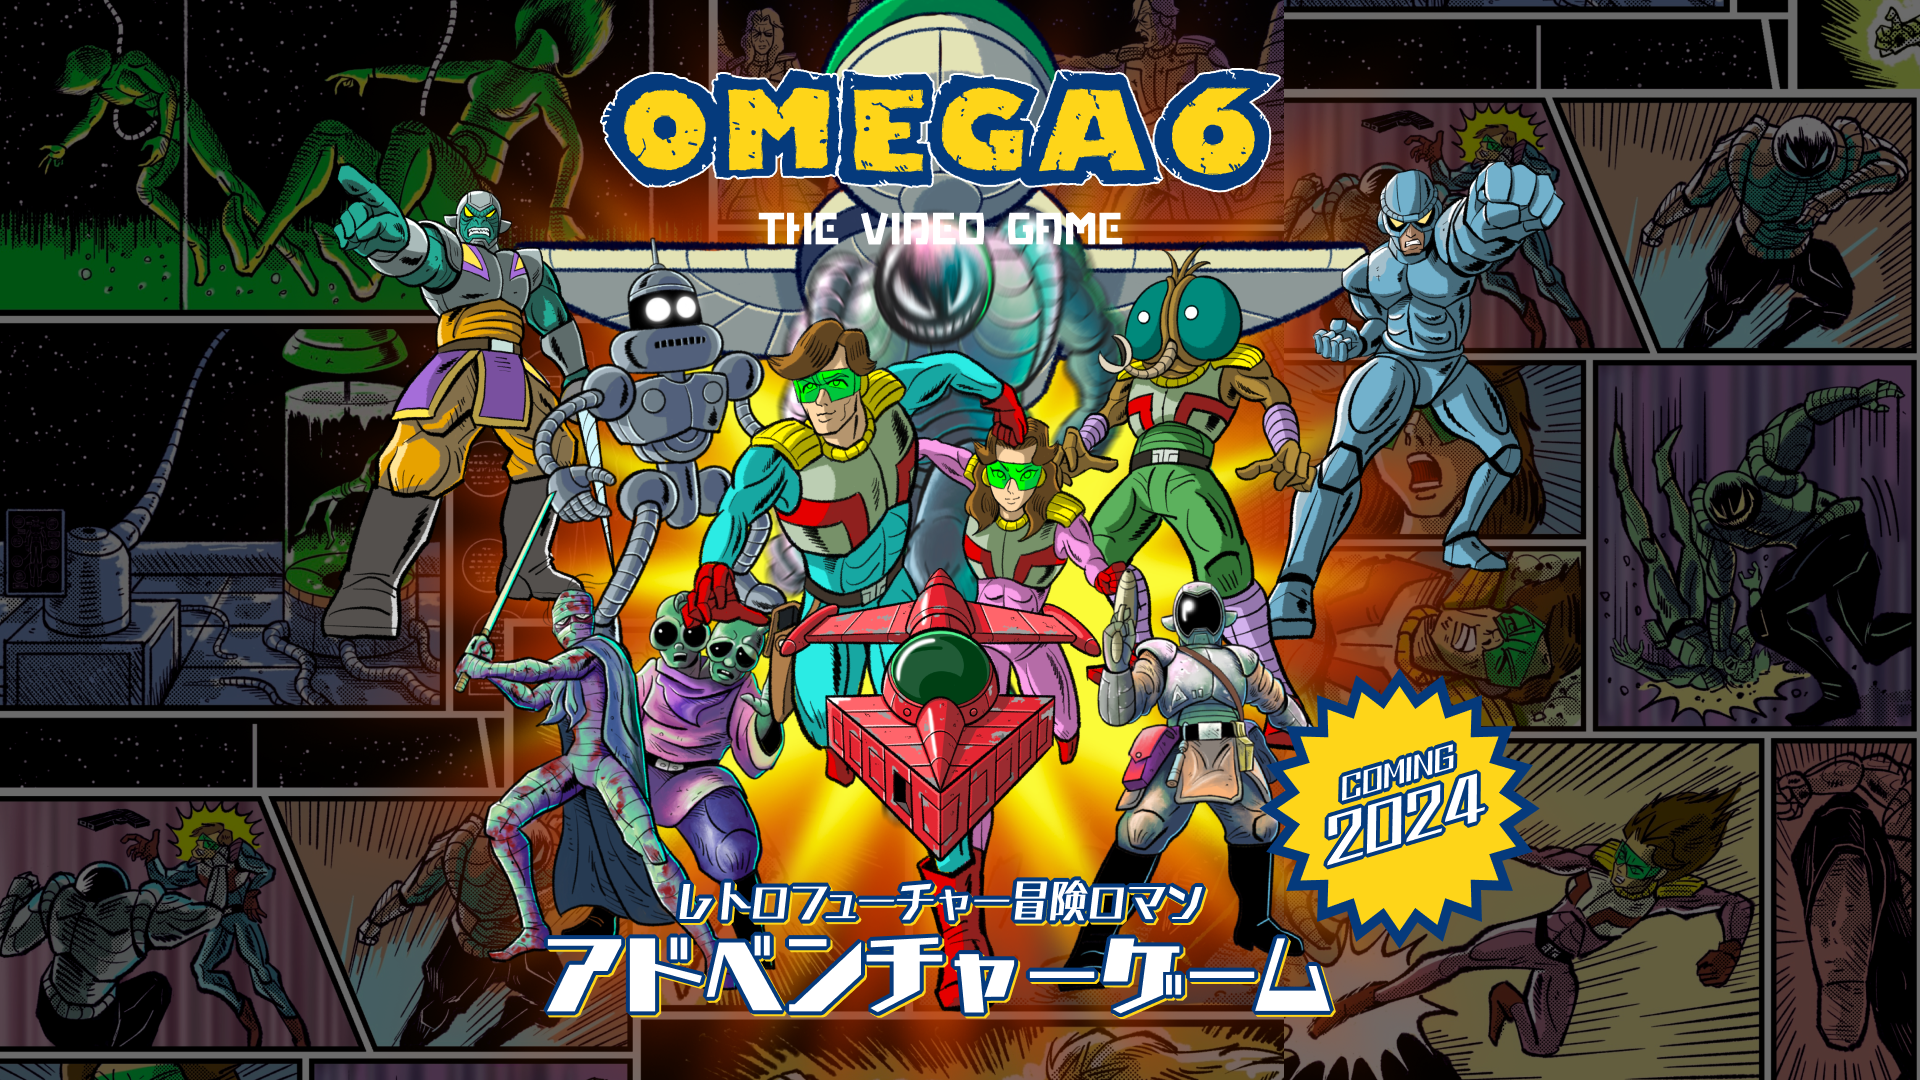 OMEGA 6 The Video Game Official Website - CITY CONNECTION CO., LTD.